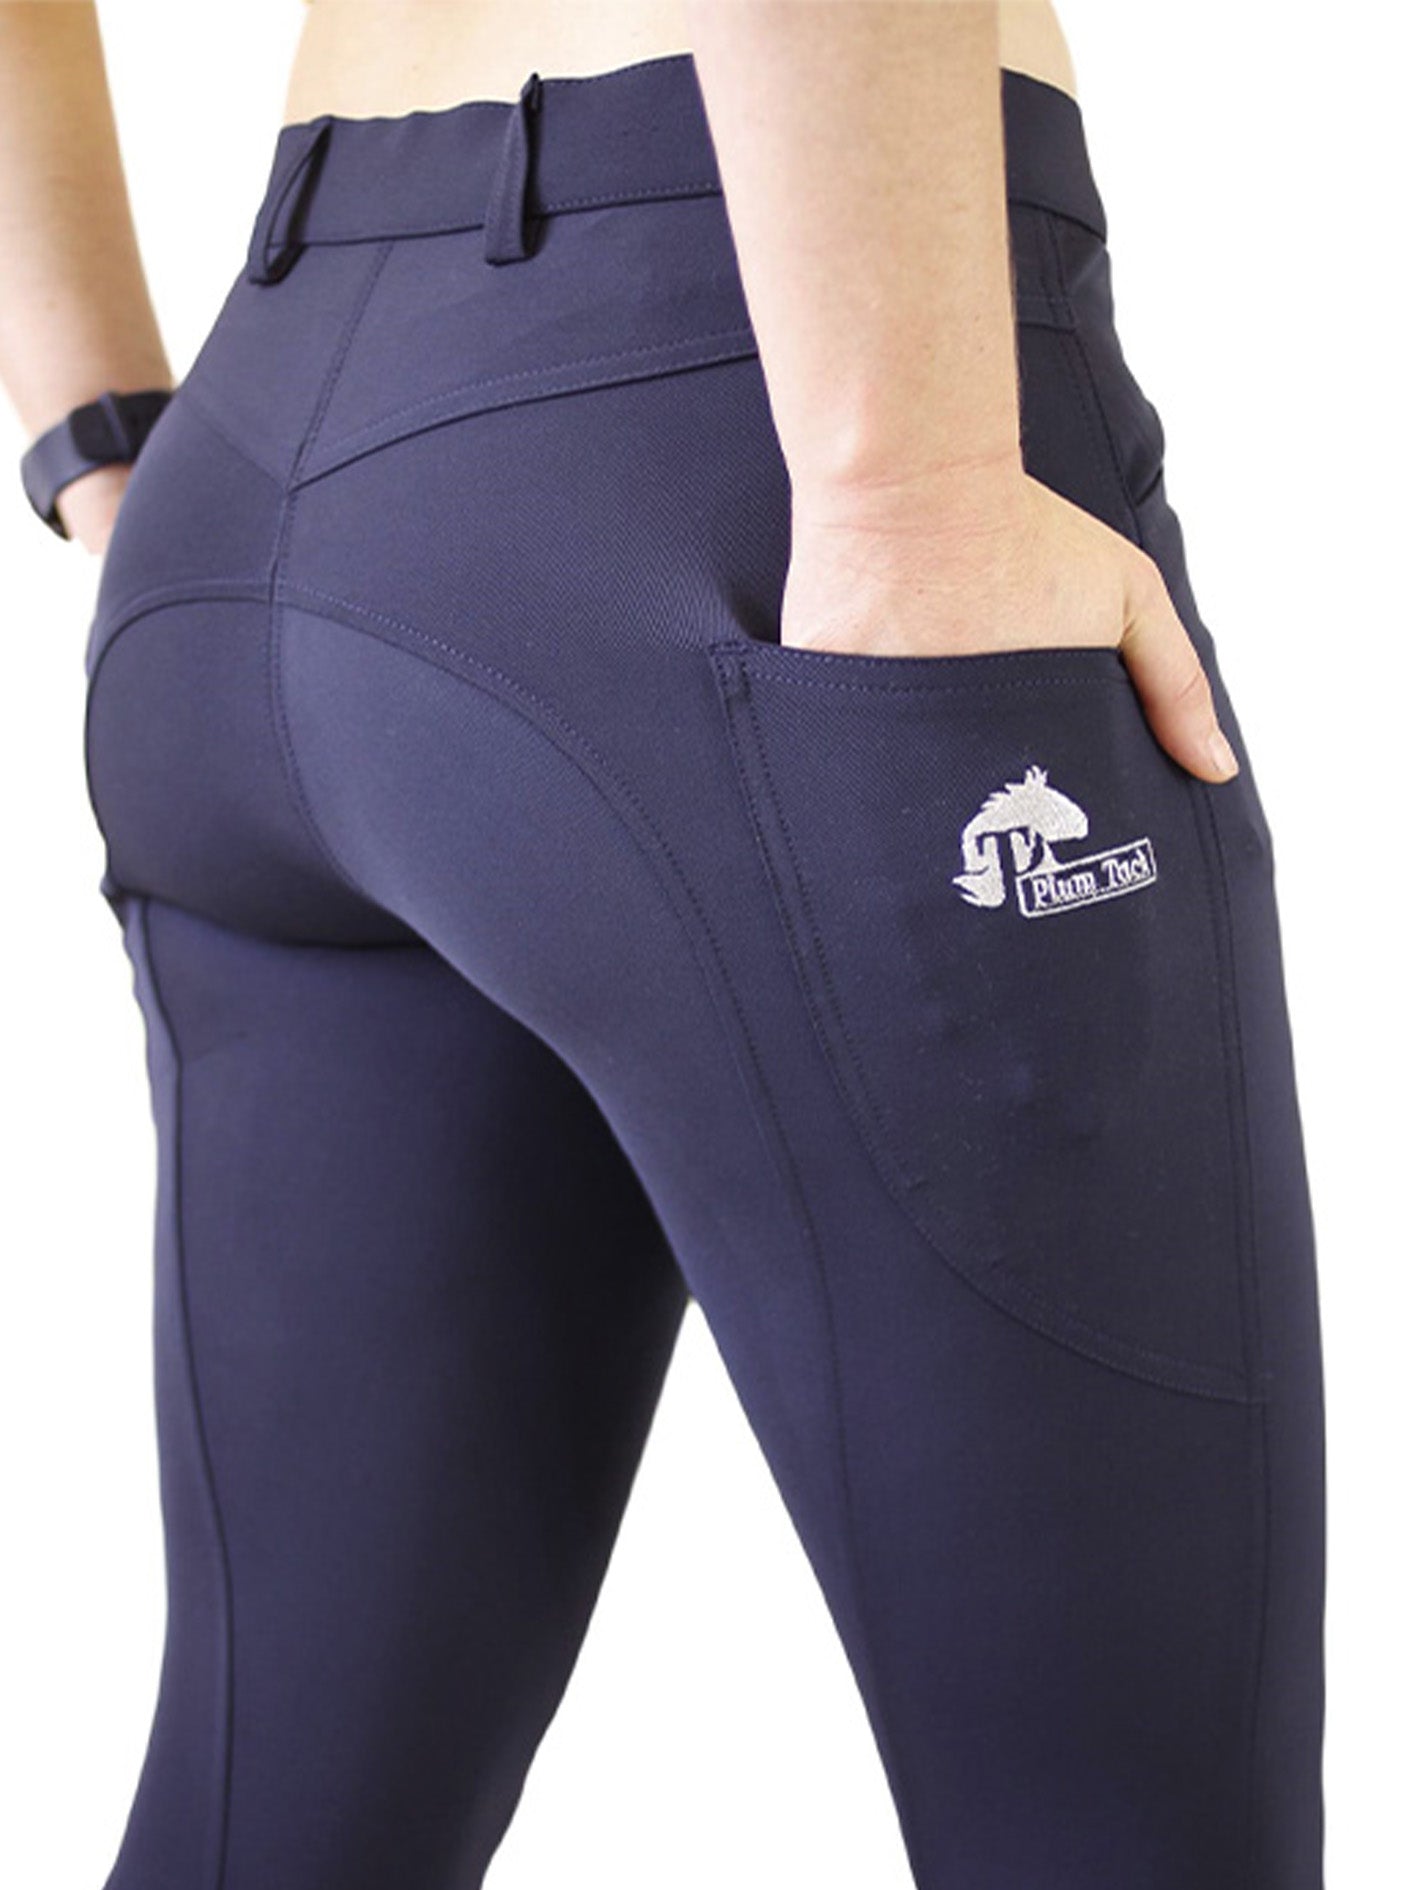 CoolMax Navy Breeches with NO Silicone